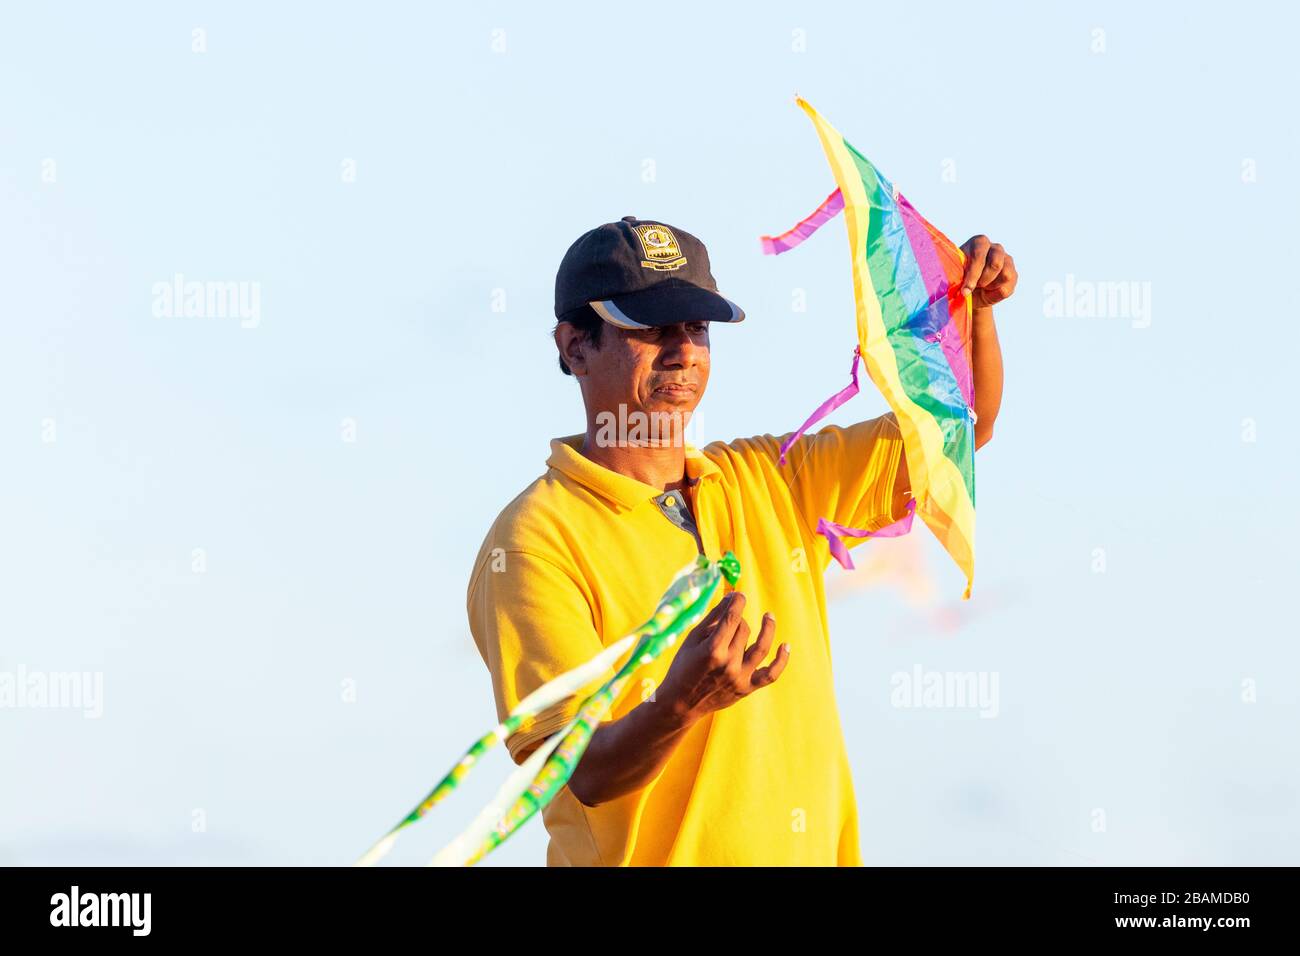 Local man preparing to fly a kite at Galle Face Green in Colombo, Sri Lanka Stock Photo